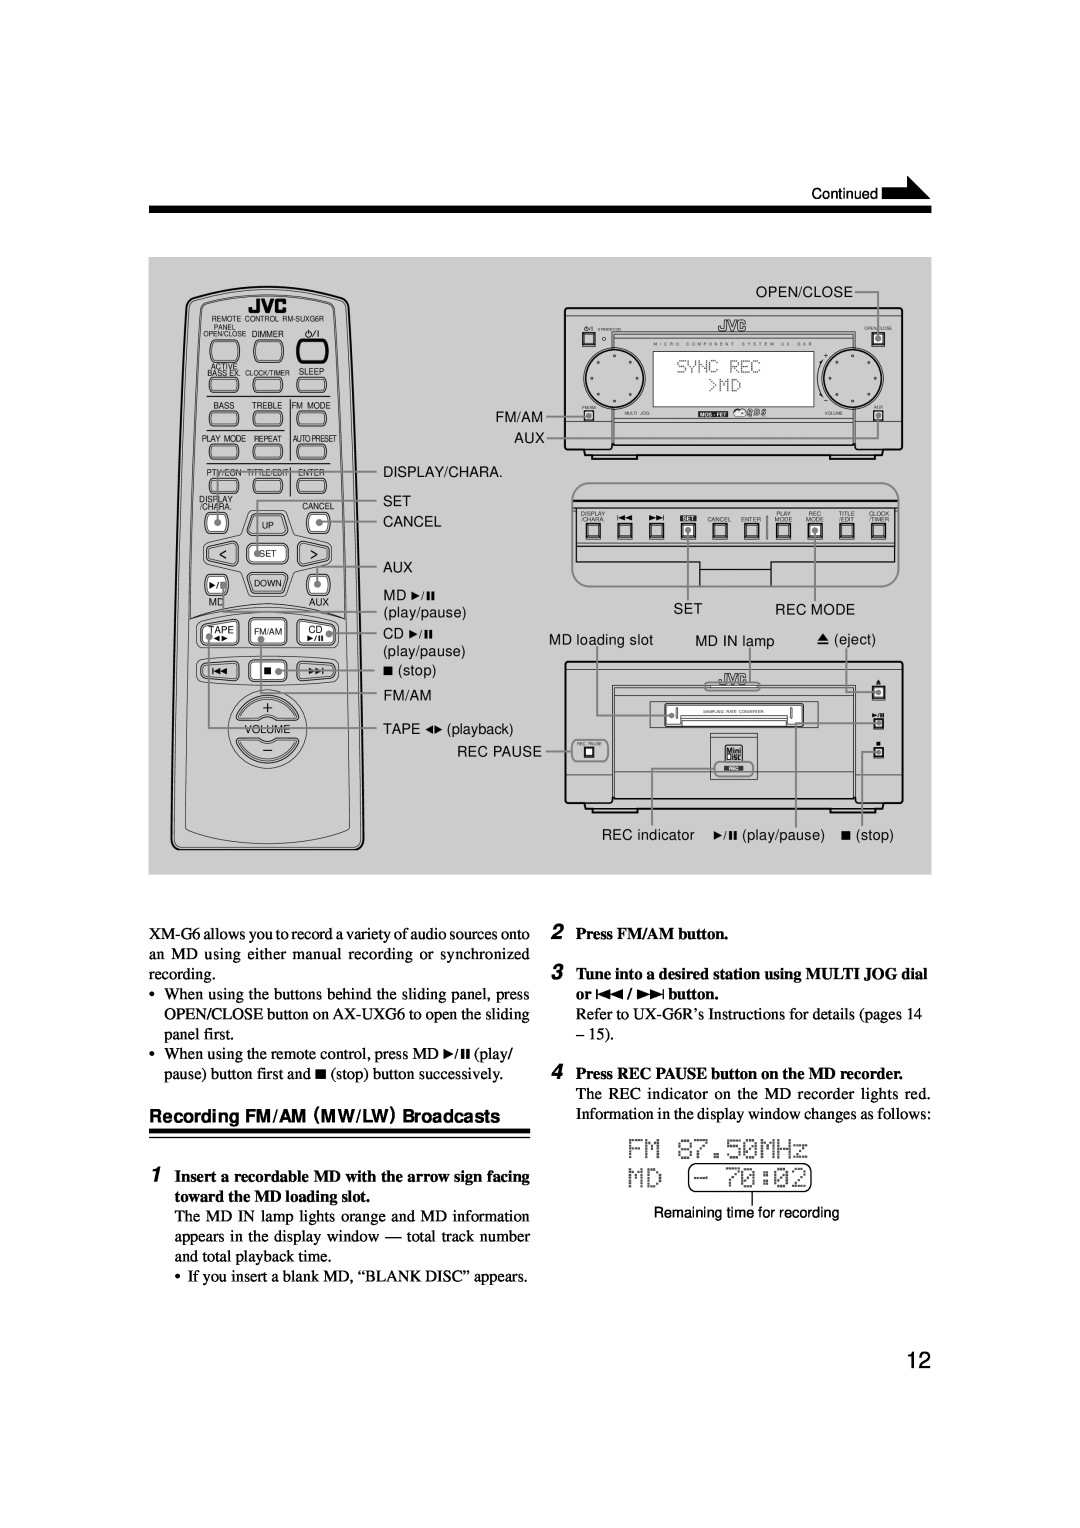 JVC XM-G6 manual Recording FM/AM MW/LW Broadcasts, Press FM/AM button, Press REC PAUSE button on the MD recorder 